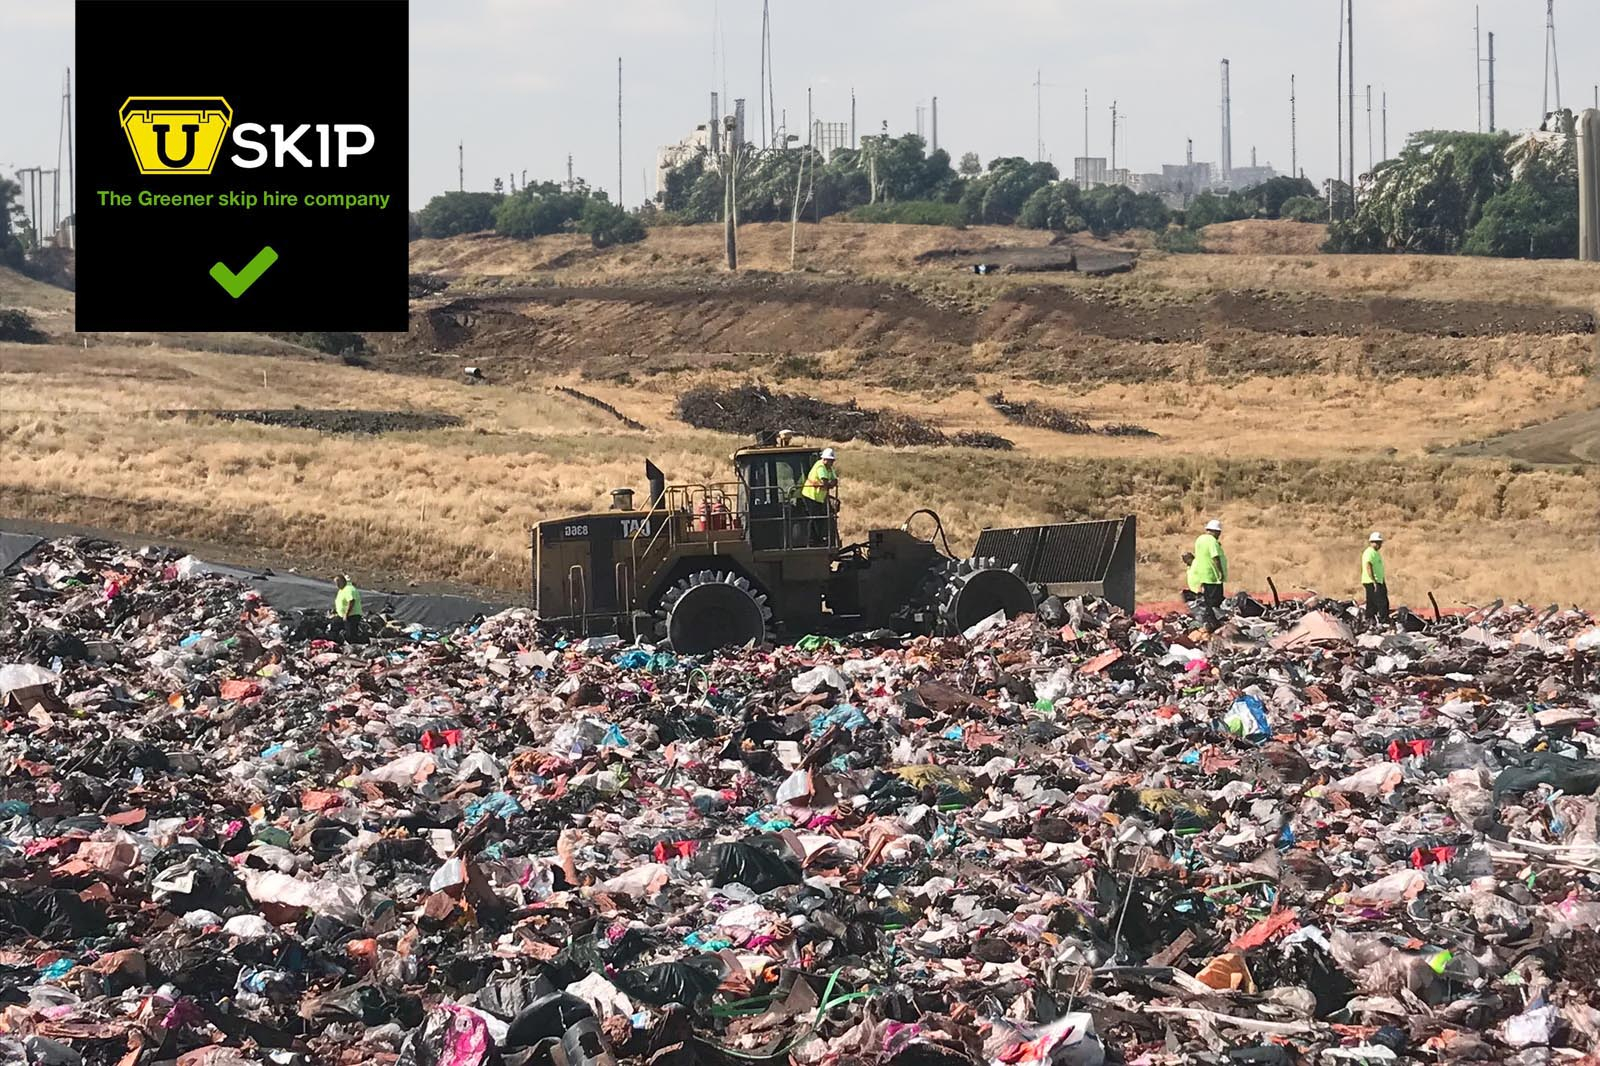 USKIP Recycling and landfill 